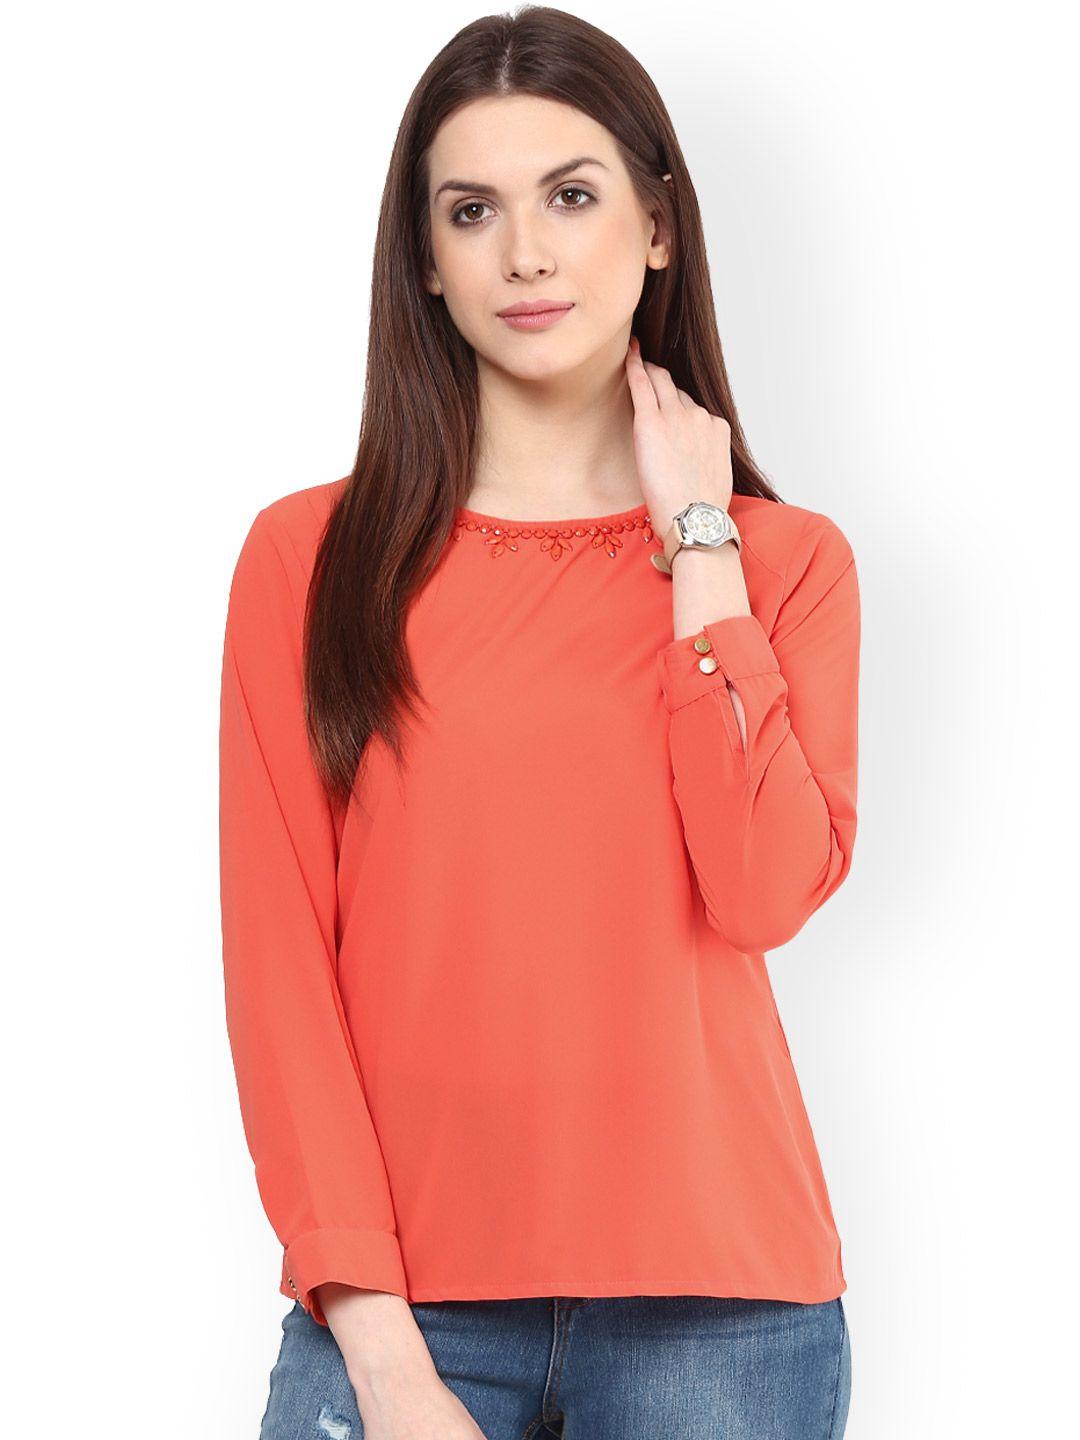 rare coral orange georgette top with embellished detail